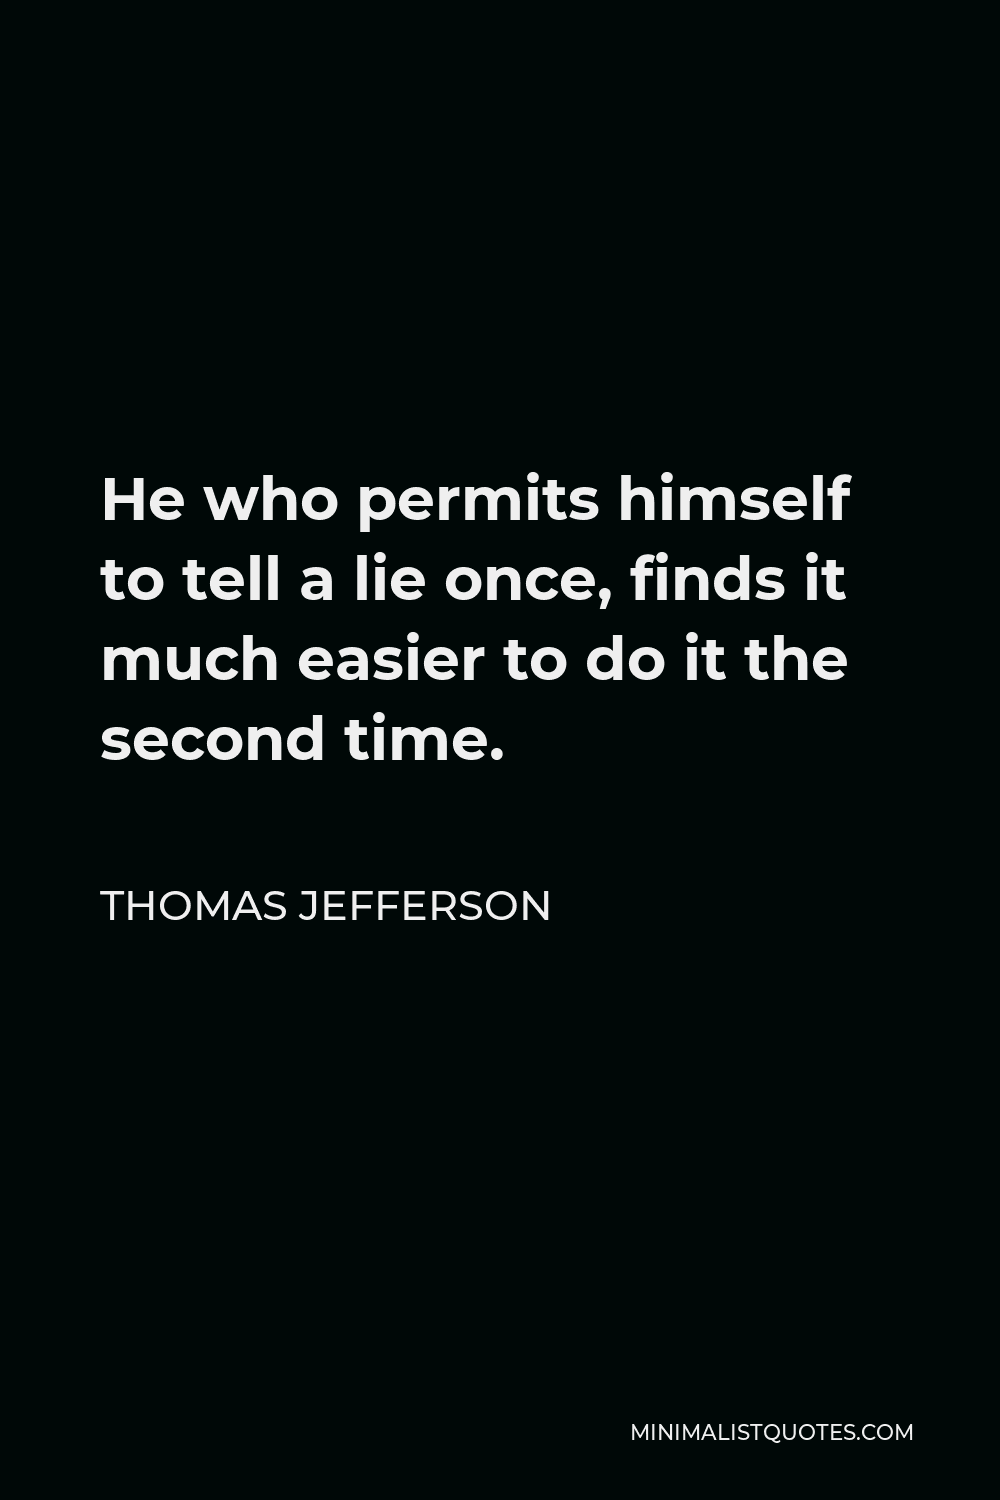 Thomas Jefferson Quote - He who permits himself to tell a lie once, finds it much easier to do it the second time.